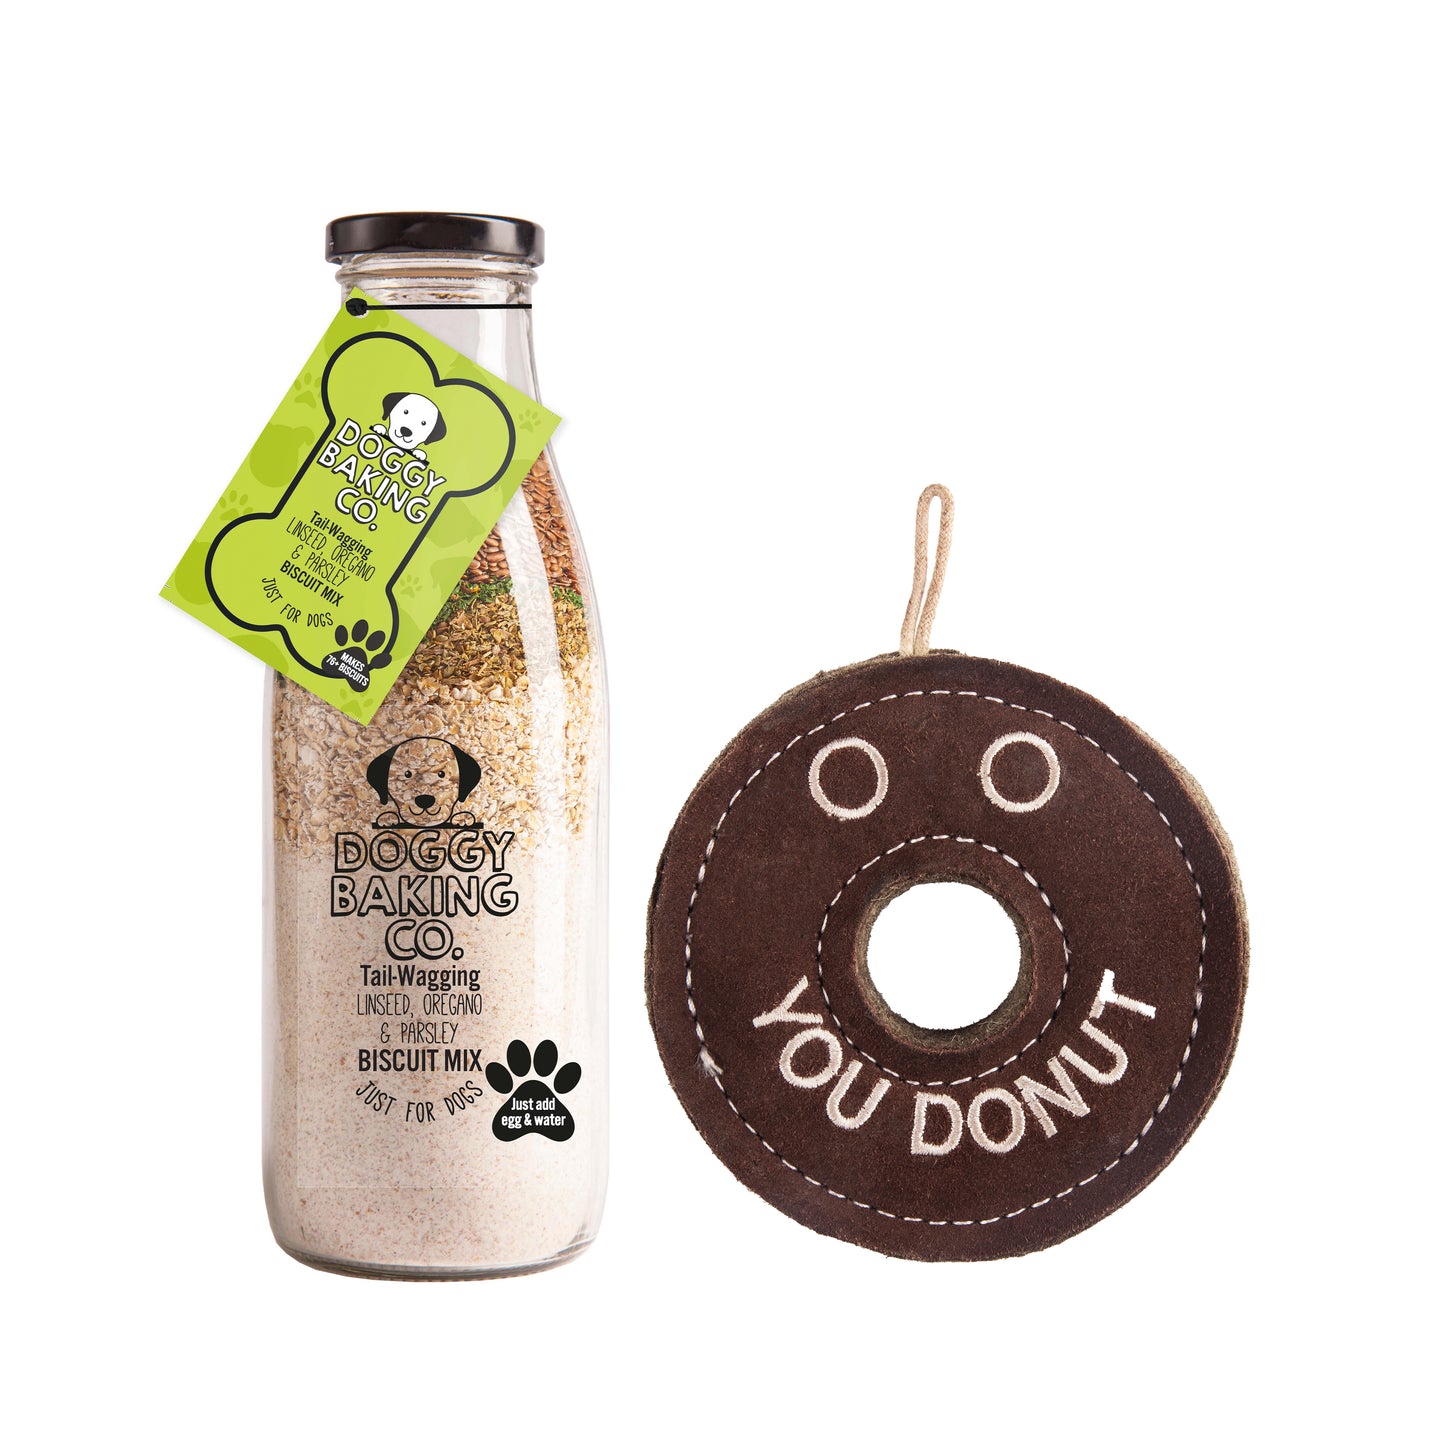 Linseed, Oregano & Parsley Biscuit Baking Mix & Donut Toy